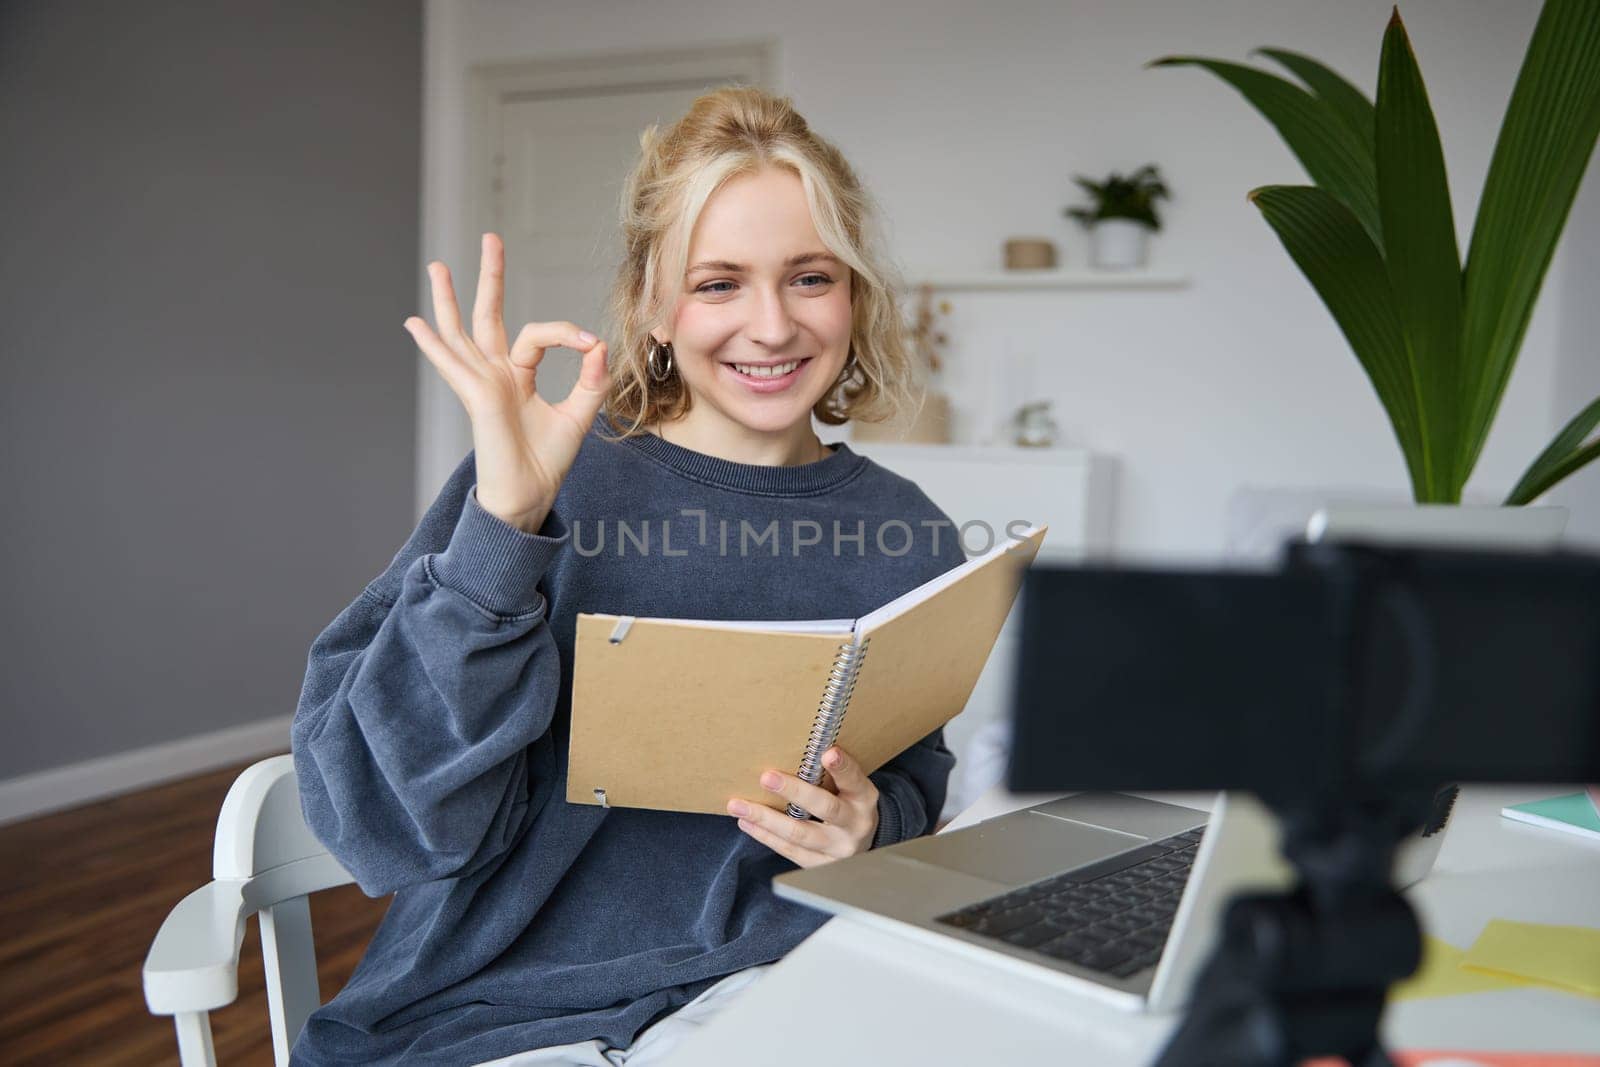 Portrait of smiling young woman, holding notebook, showing okay, ok sign, looking at digital camera, recording video, creating content.